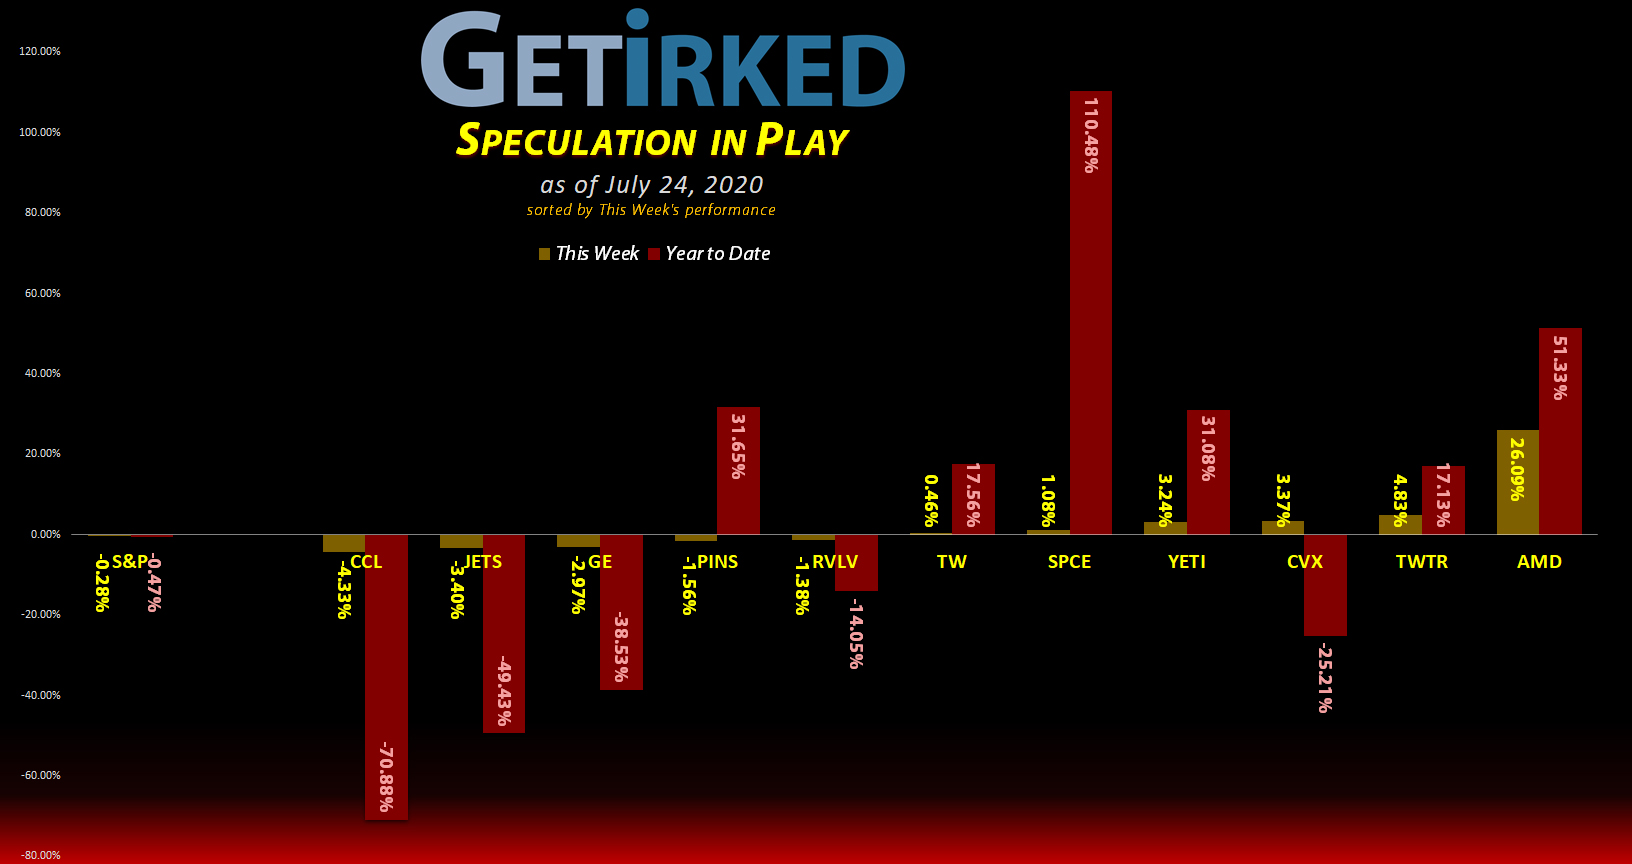 Get Irked's Speculation in Play - July 24, 2020